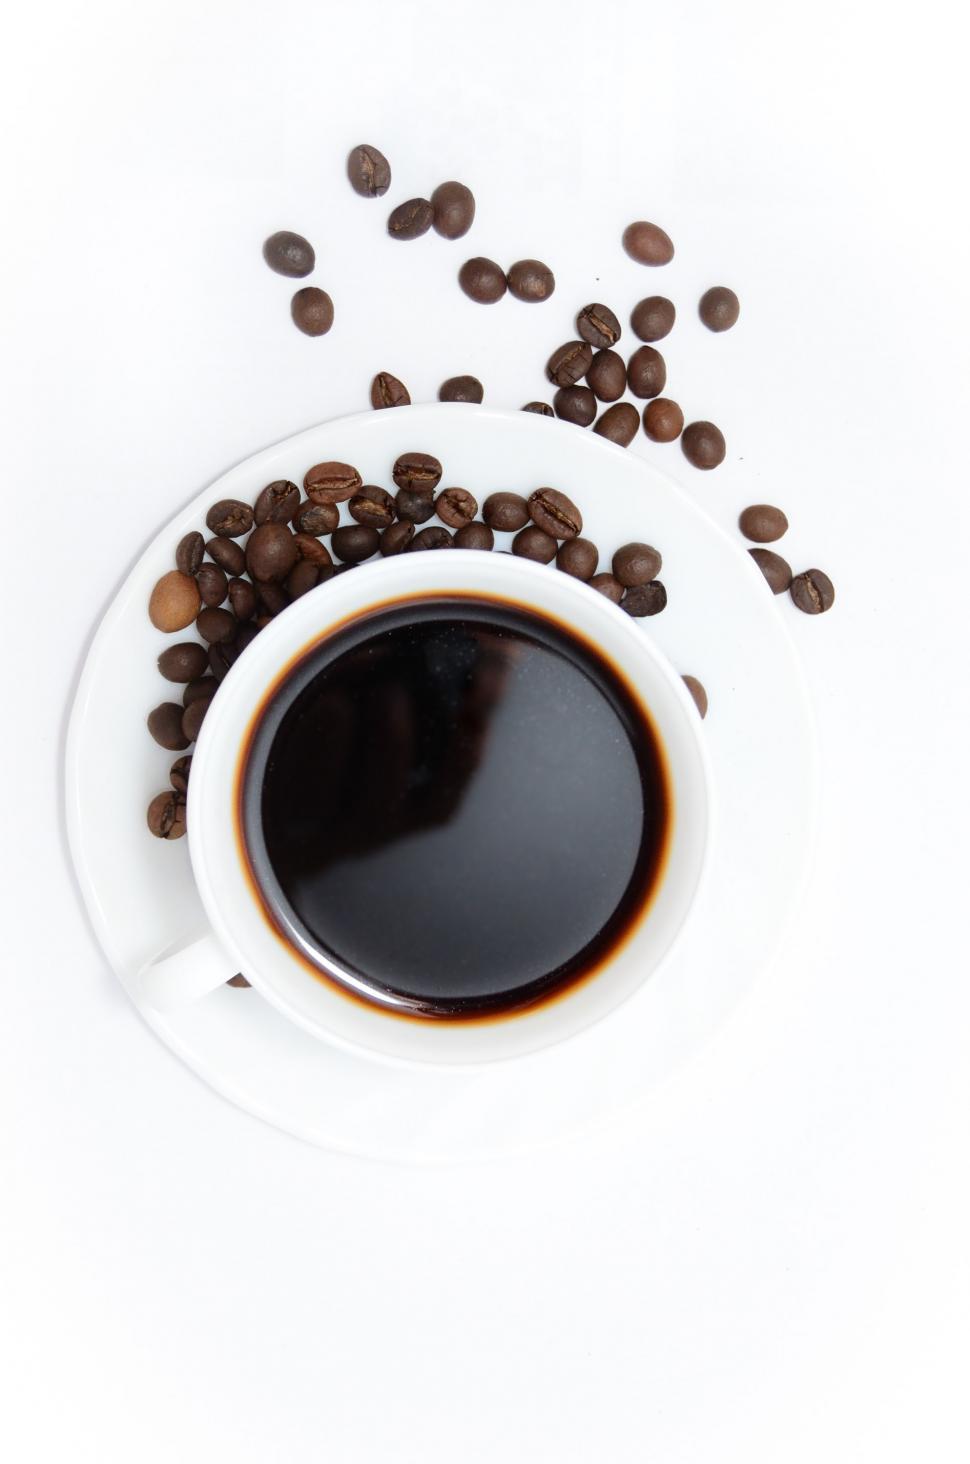 Free Image of A Cup of Coffee Surrounded by Coffee Beans 